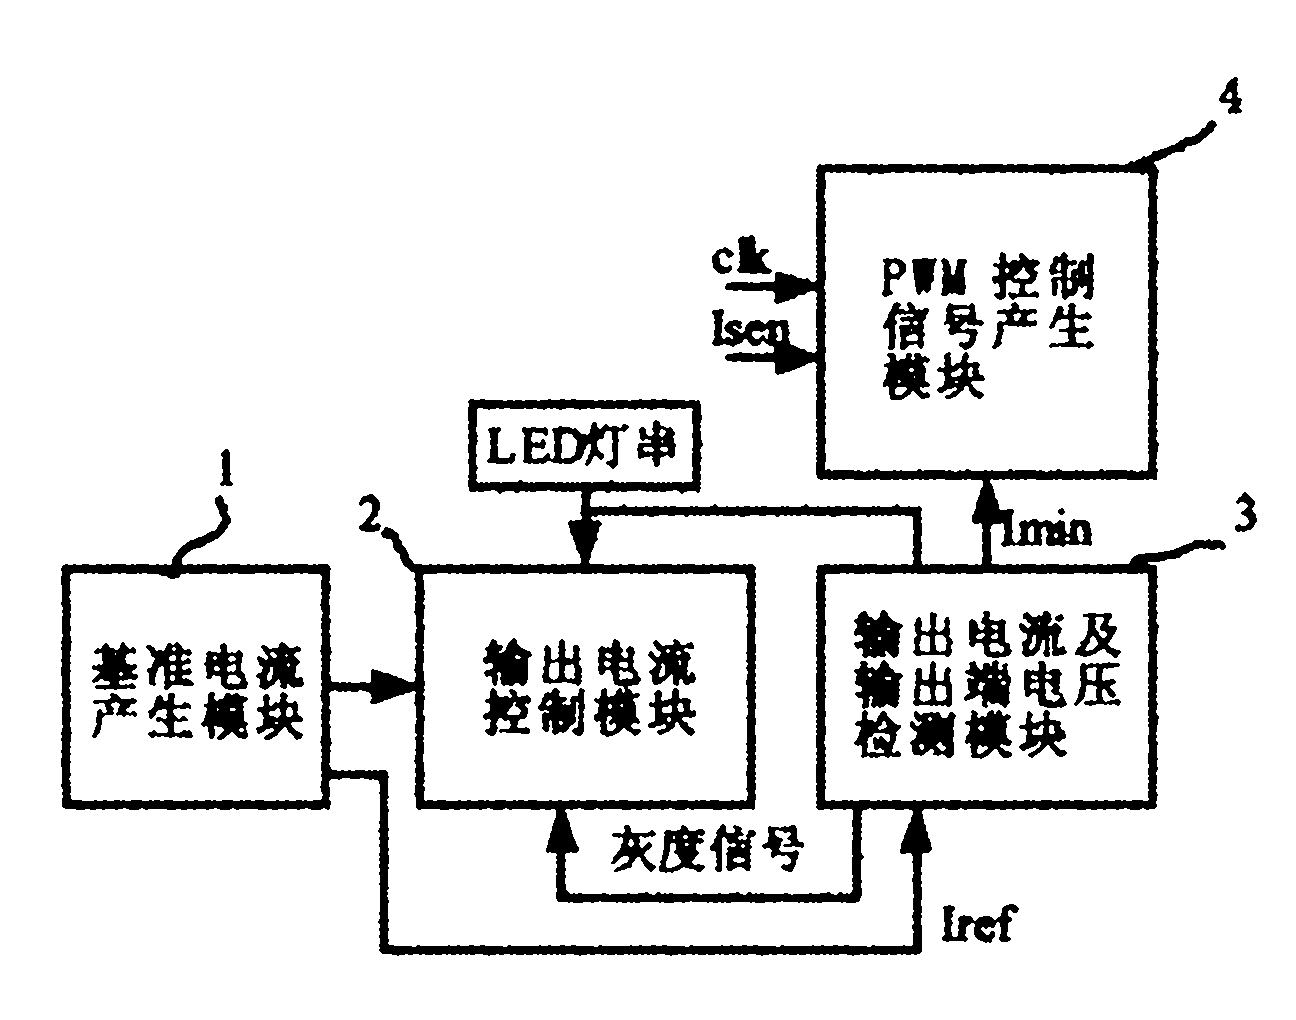 LED (light emitting diode) constant current driving circuit with current detection and LED backlight system